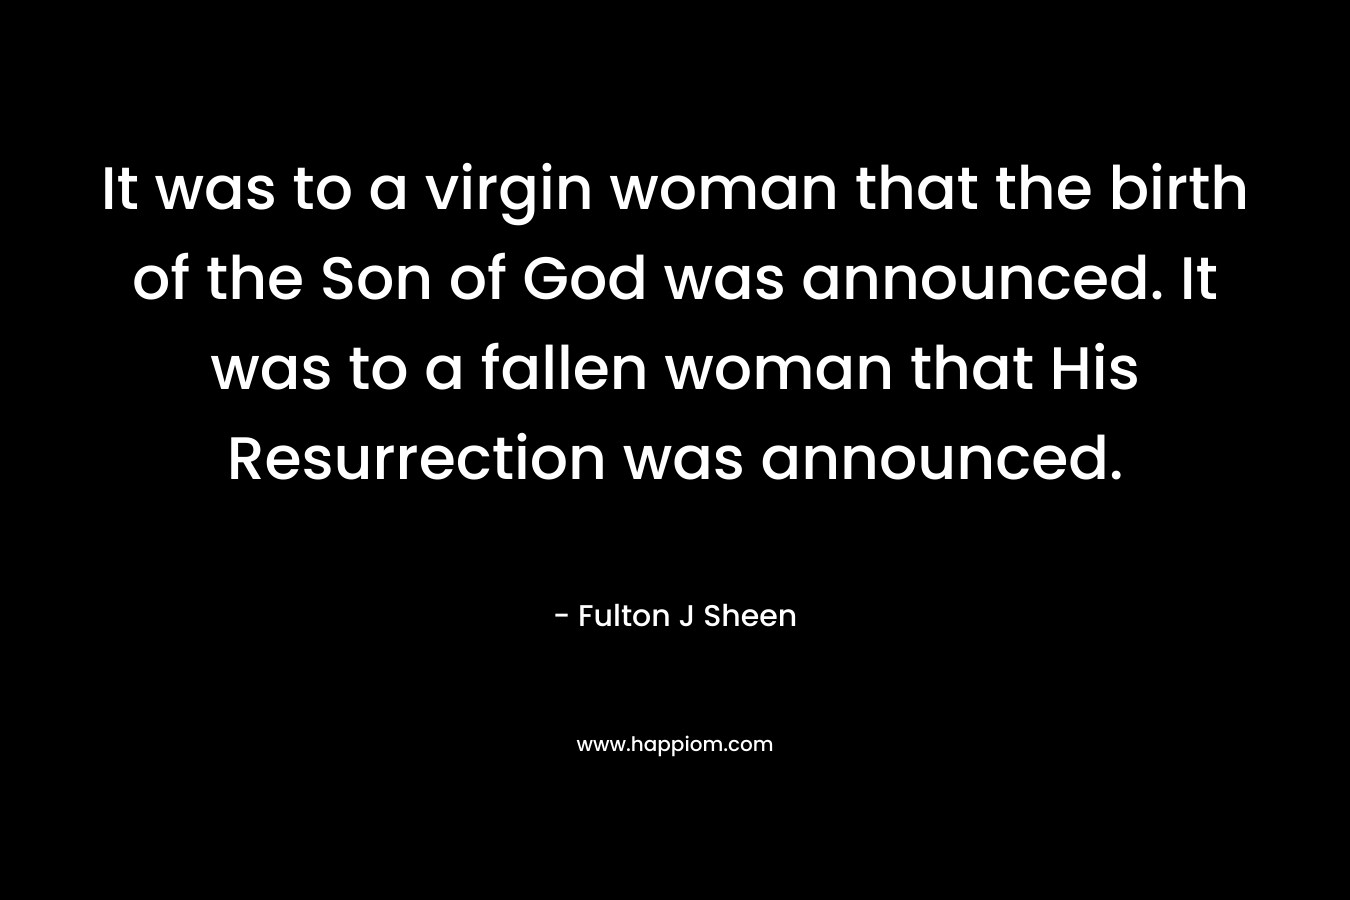 It was to a virgin woman that the birth of the Son of God was announced. It was to a fallen woman that His Resurrection was announced.